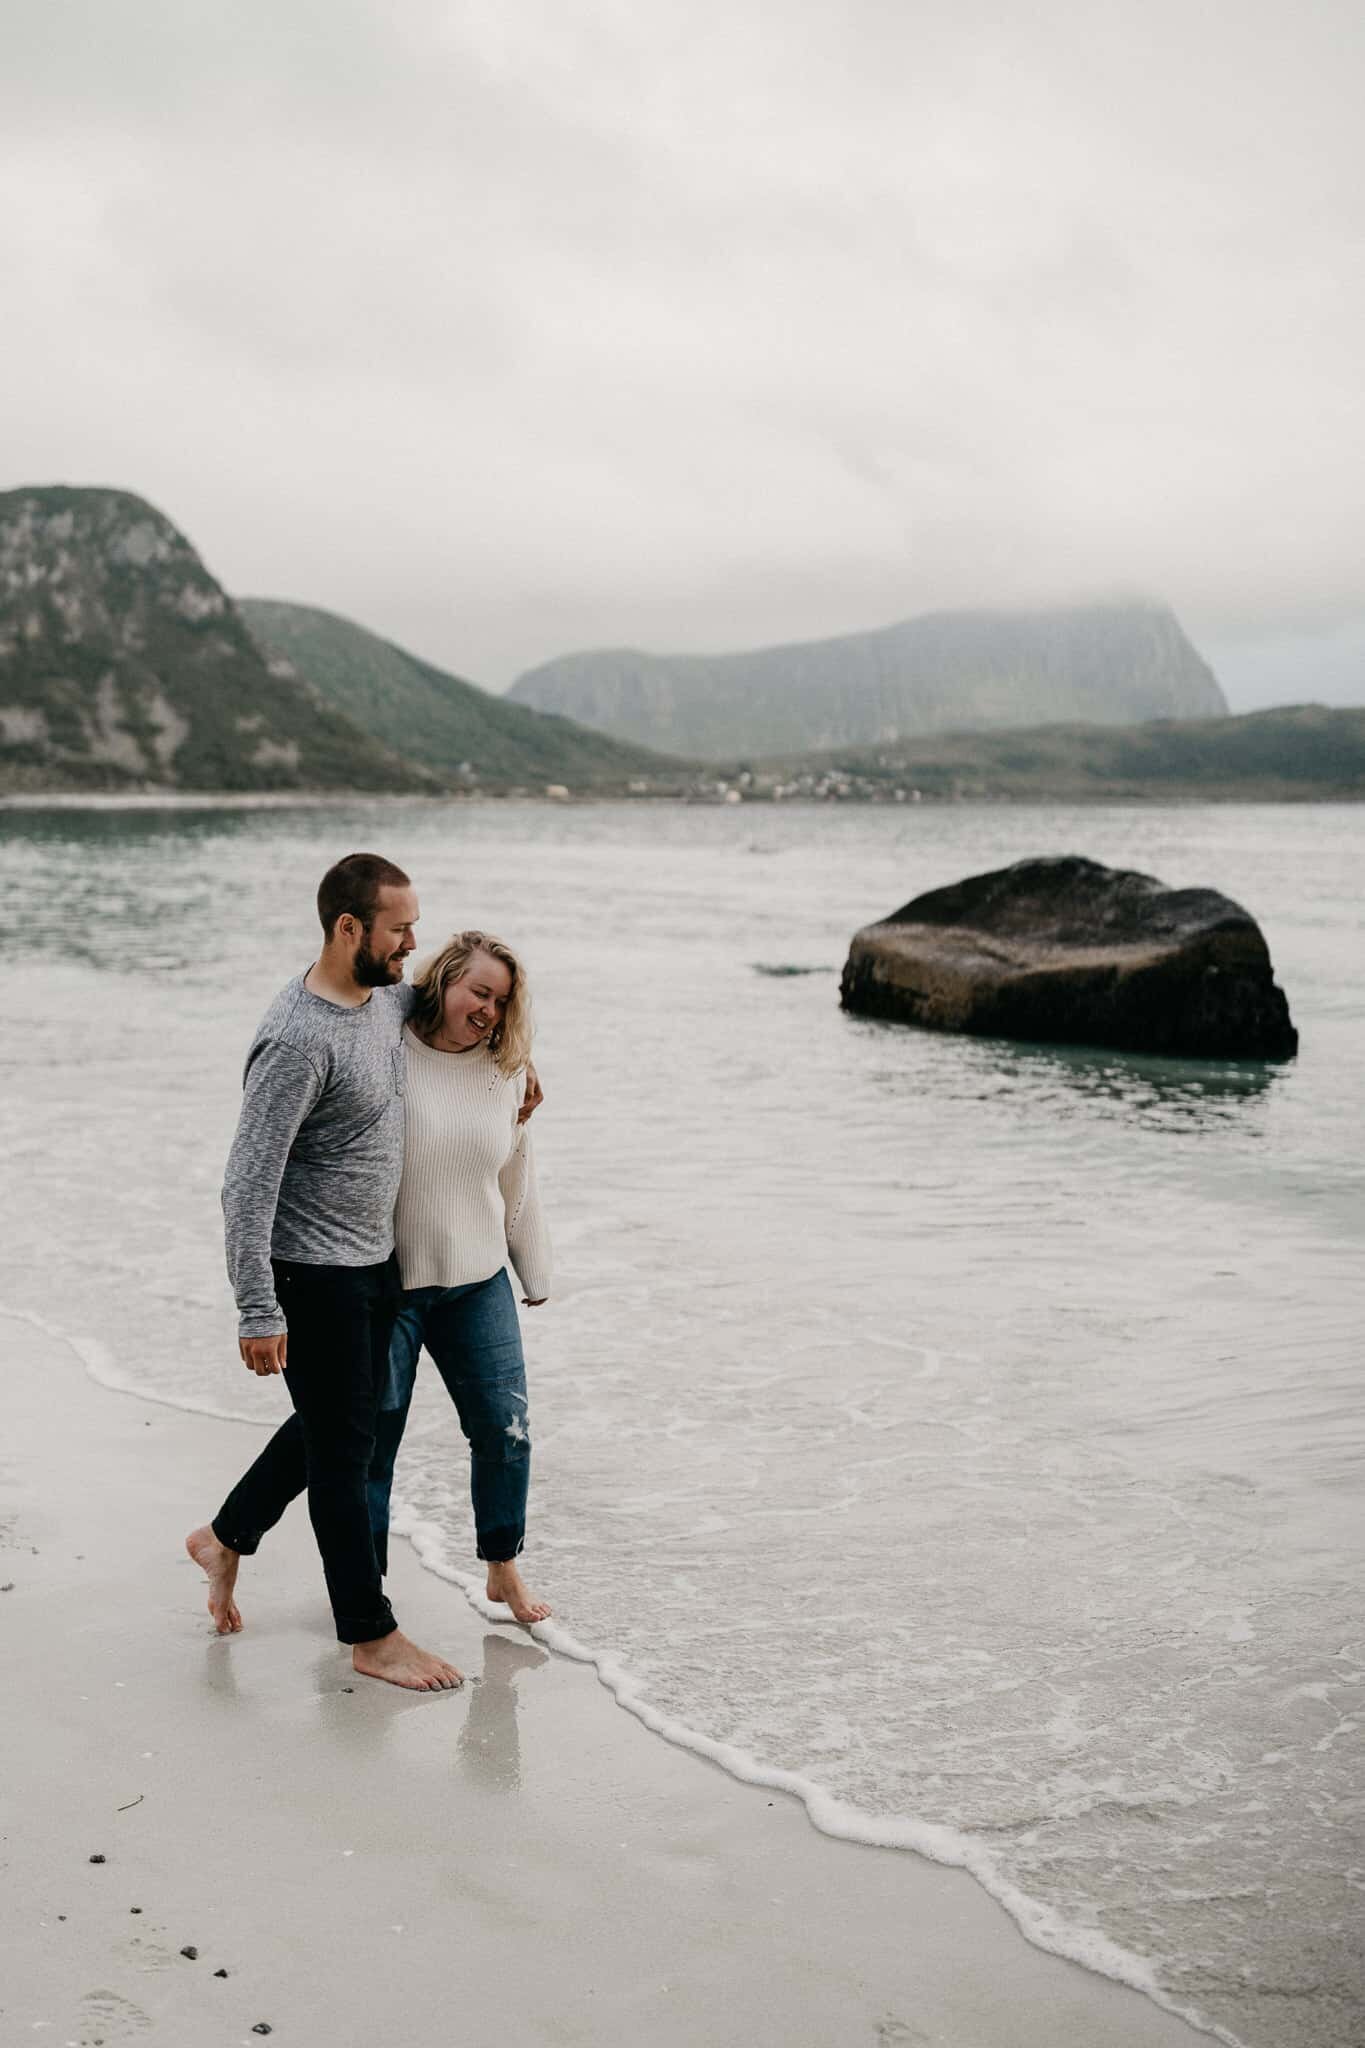 Couple walking at the beach in Nordic country